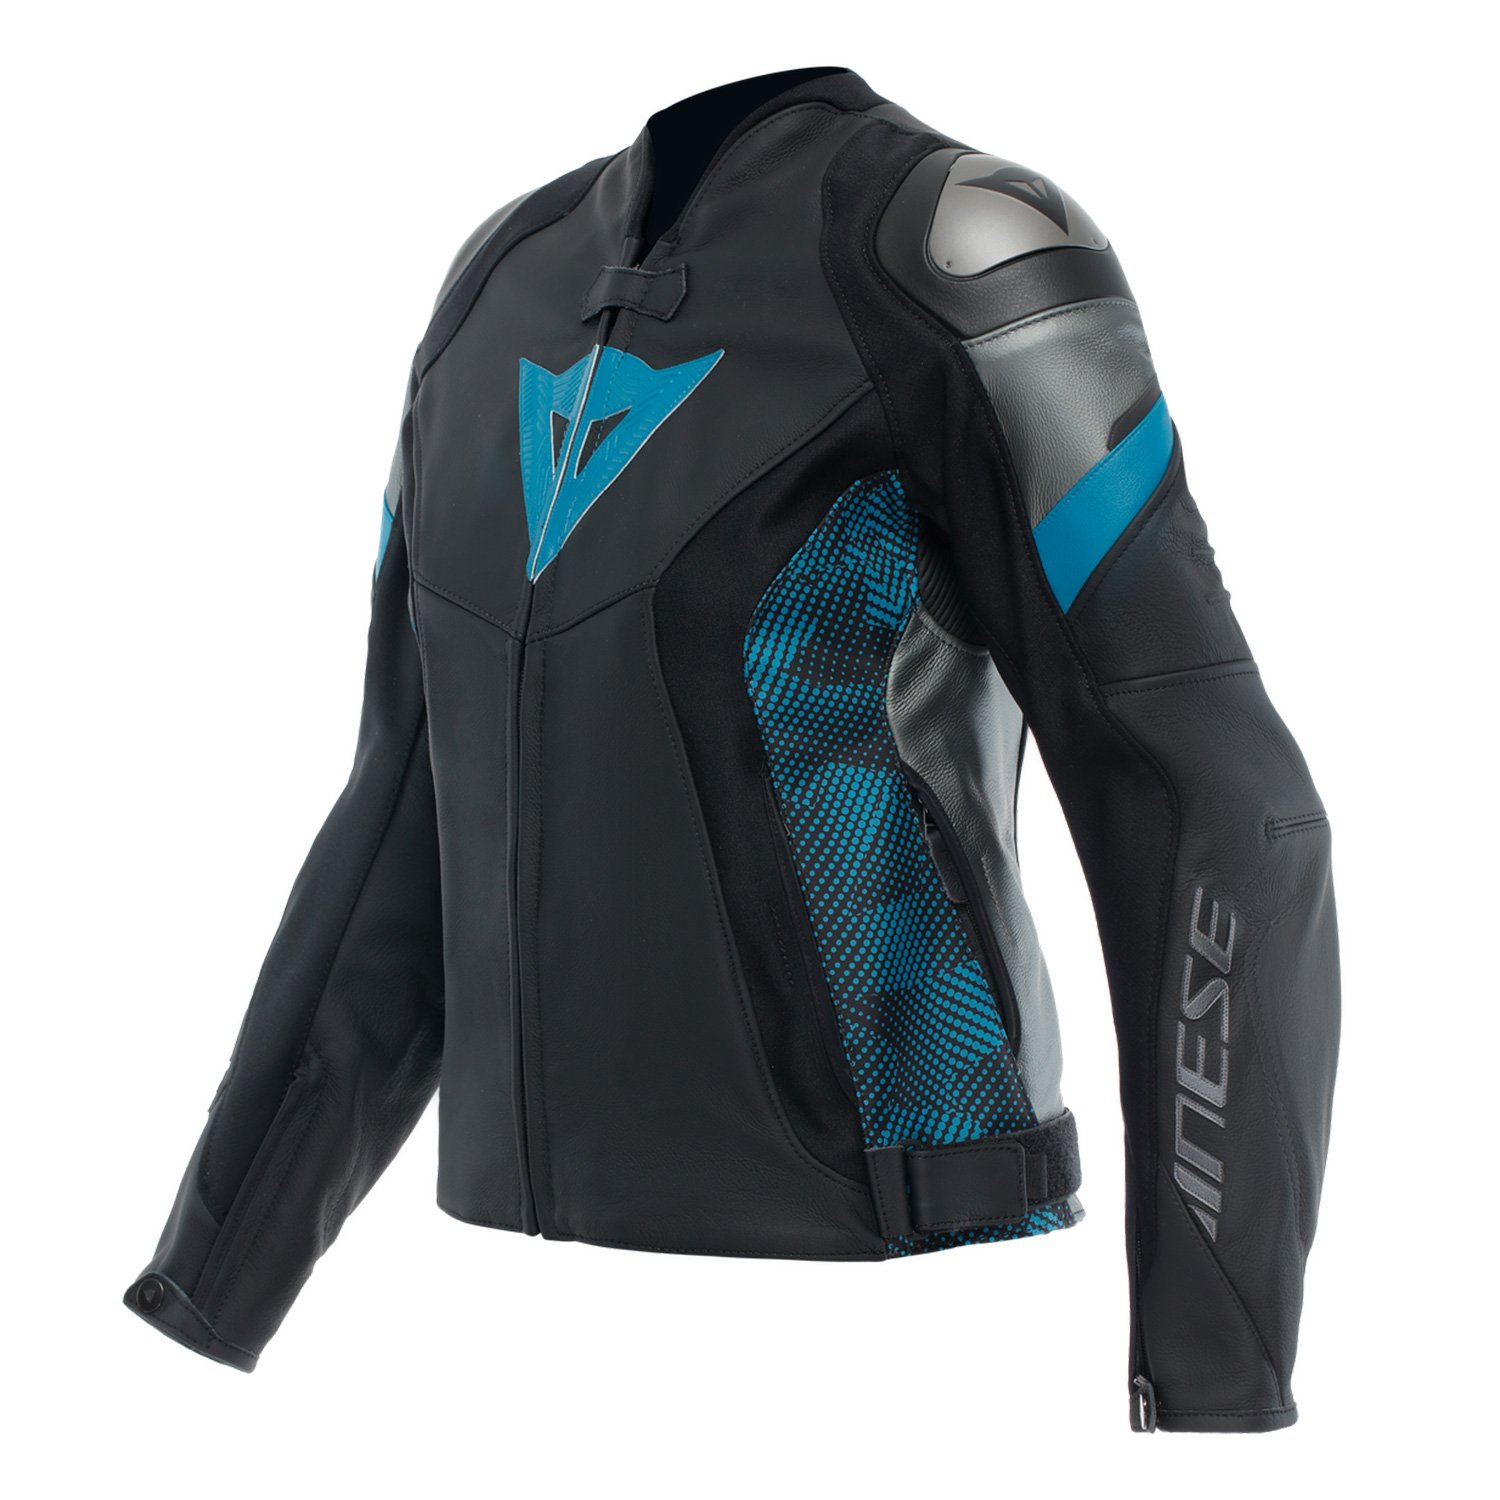 Image of Dainese Avro 5 Leather Jacket WMN Black Teal Anthracite Talla 52